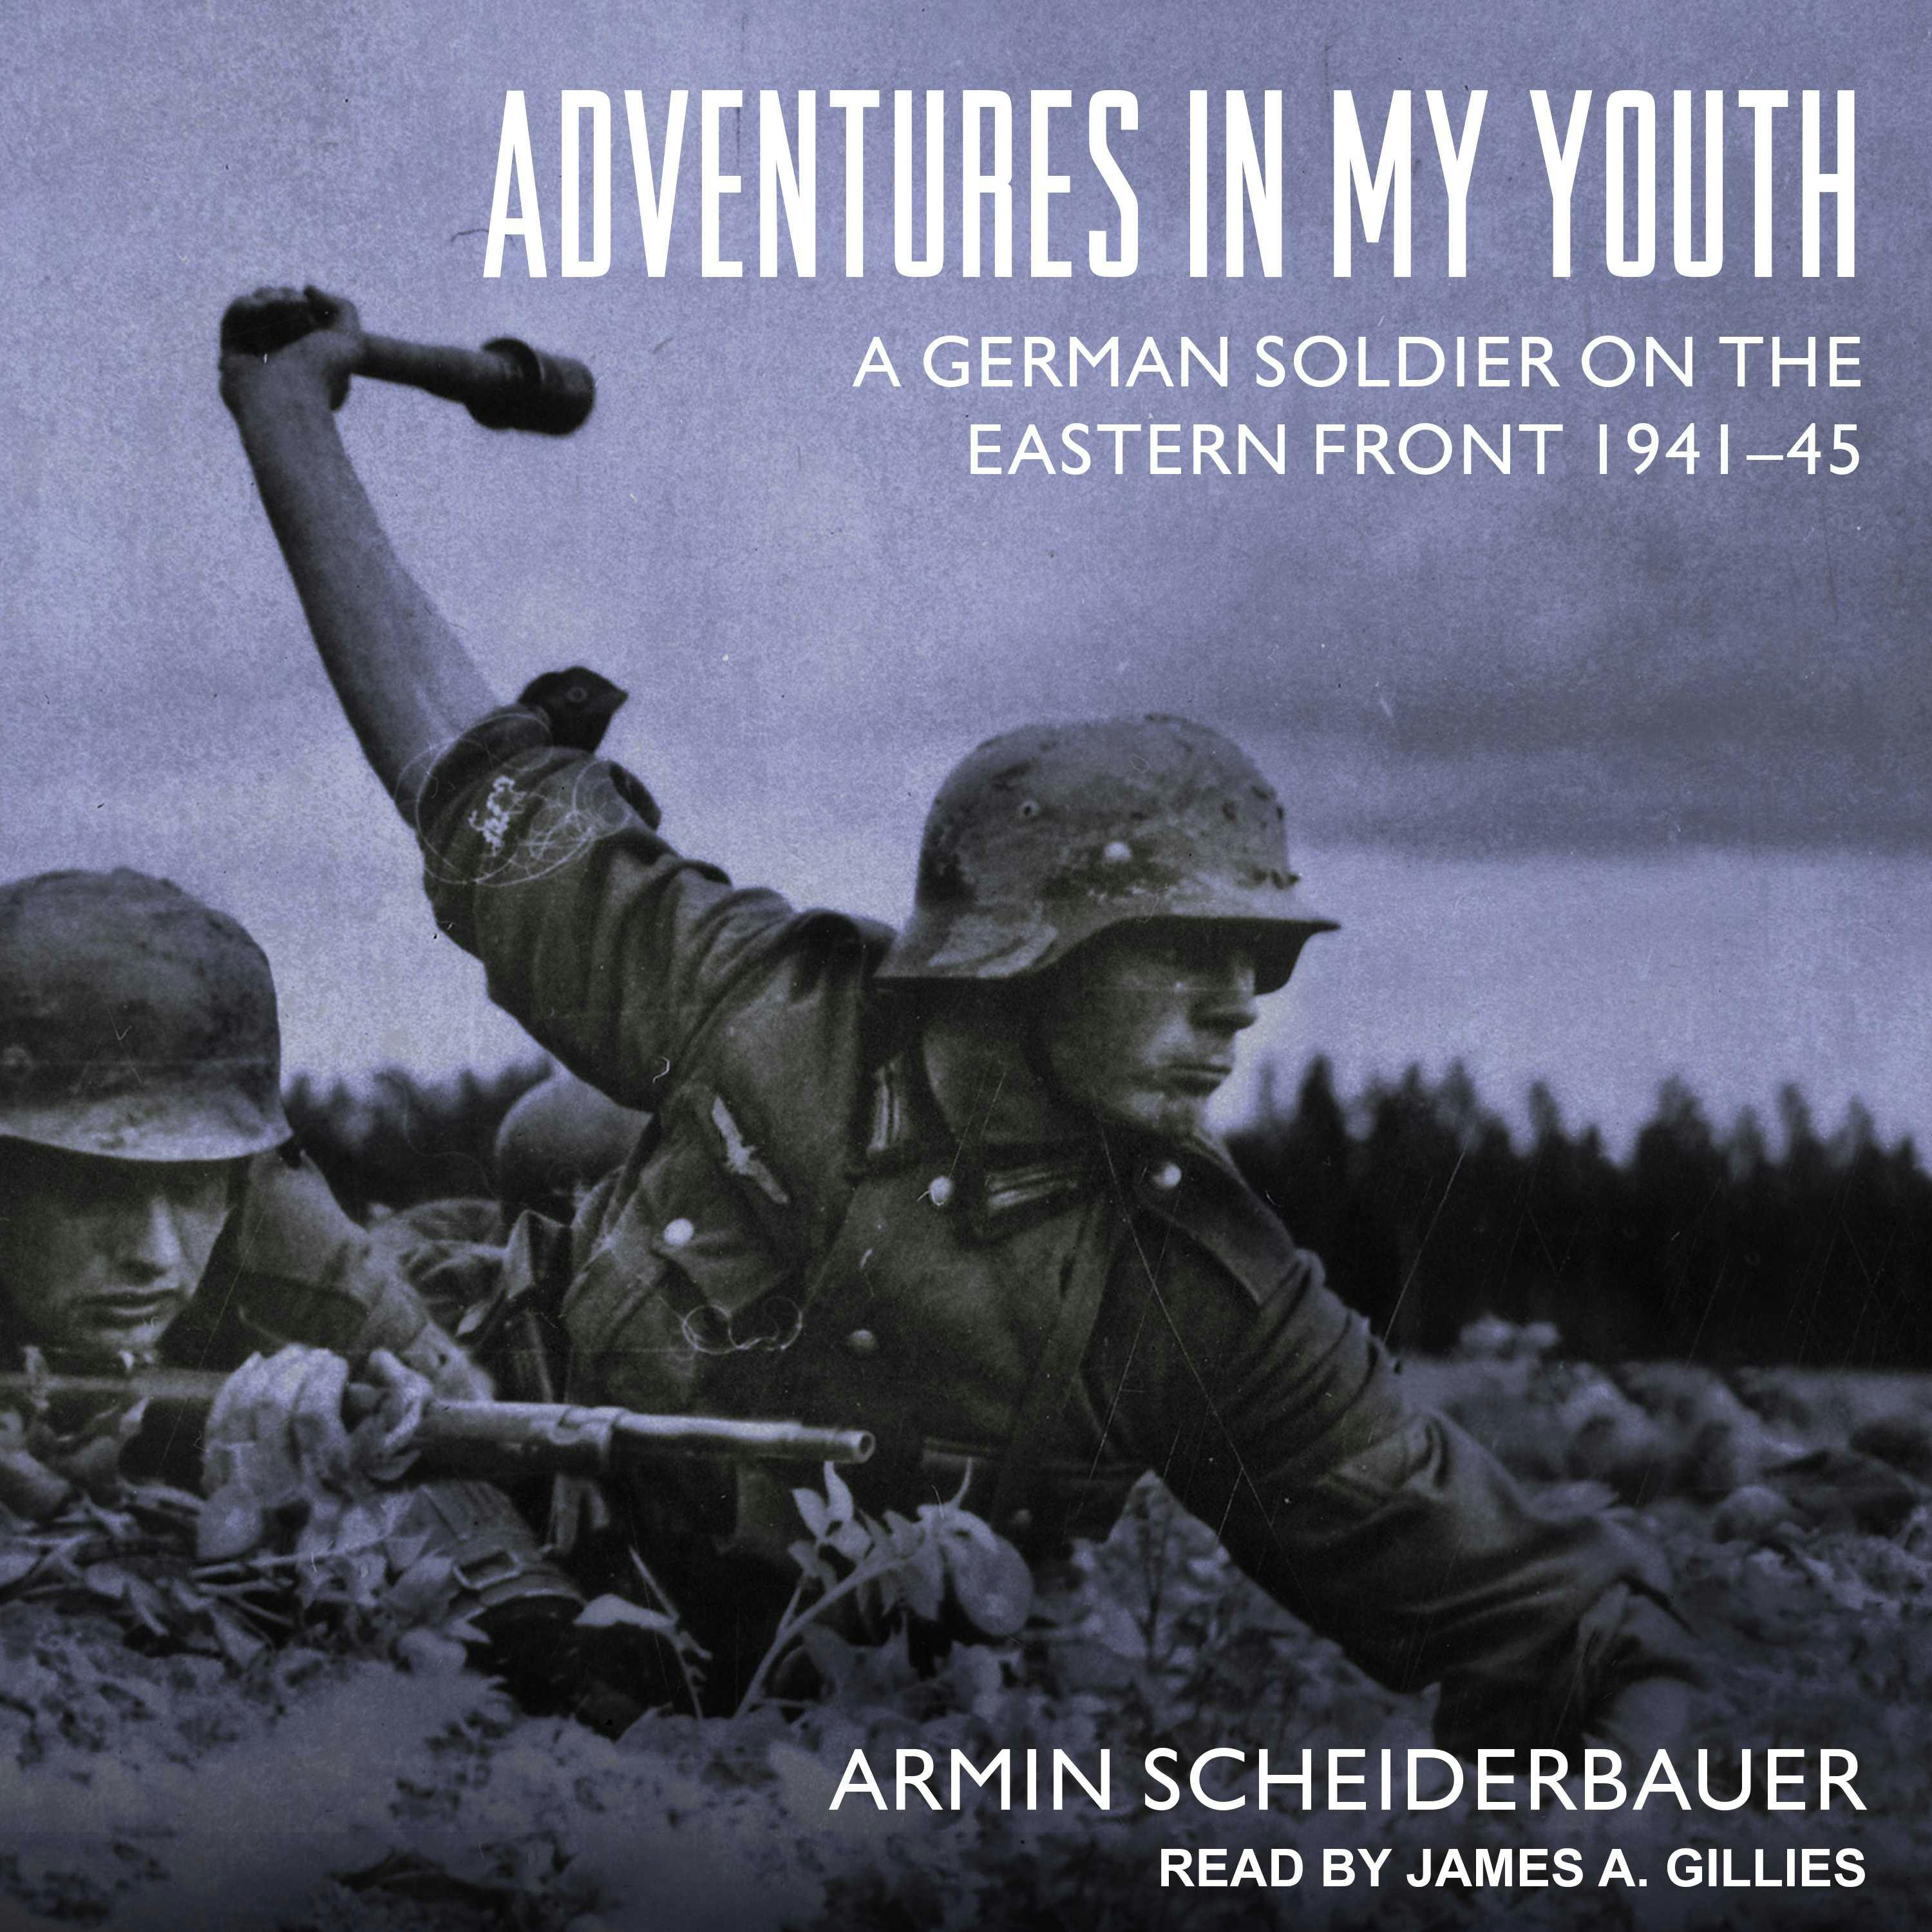 Adventures in My Youth: A German Soldier on the Eastern Front 1941-45 - Armin Scheiderbauer